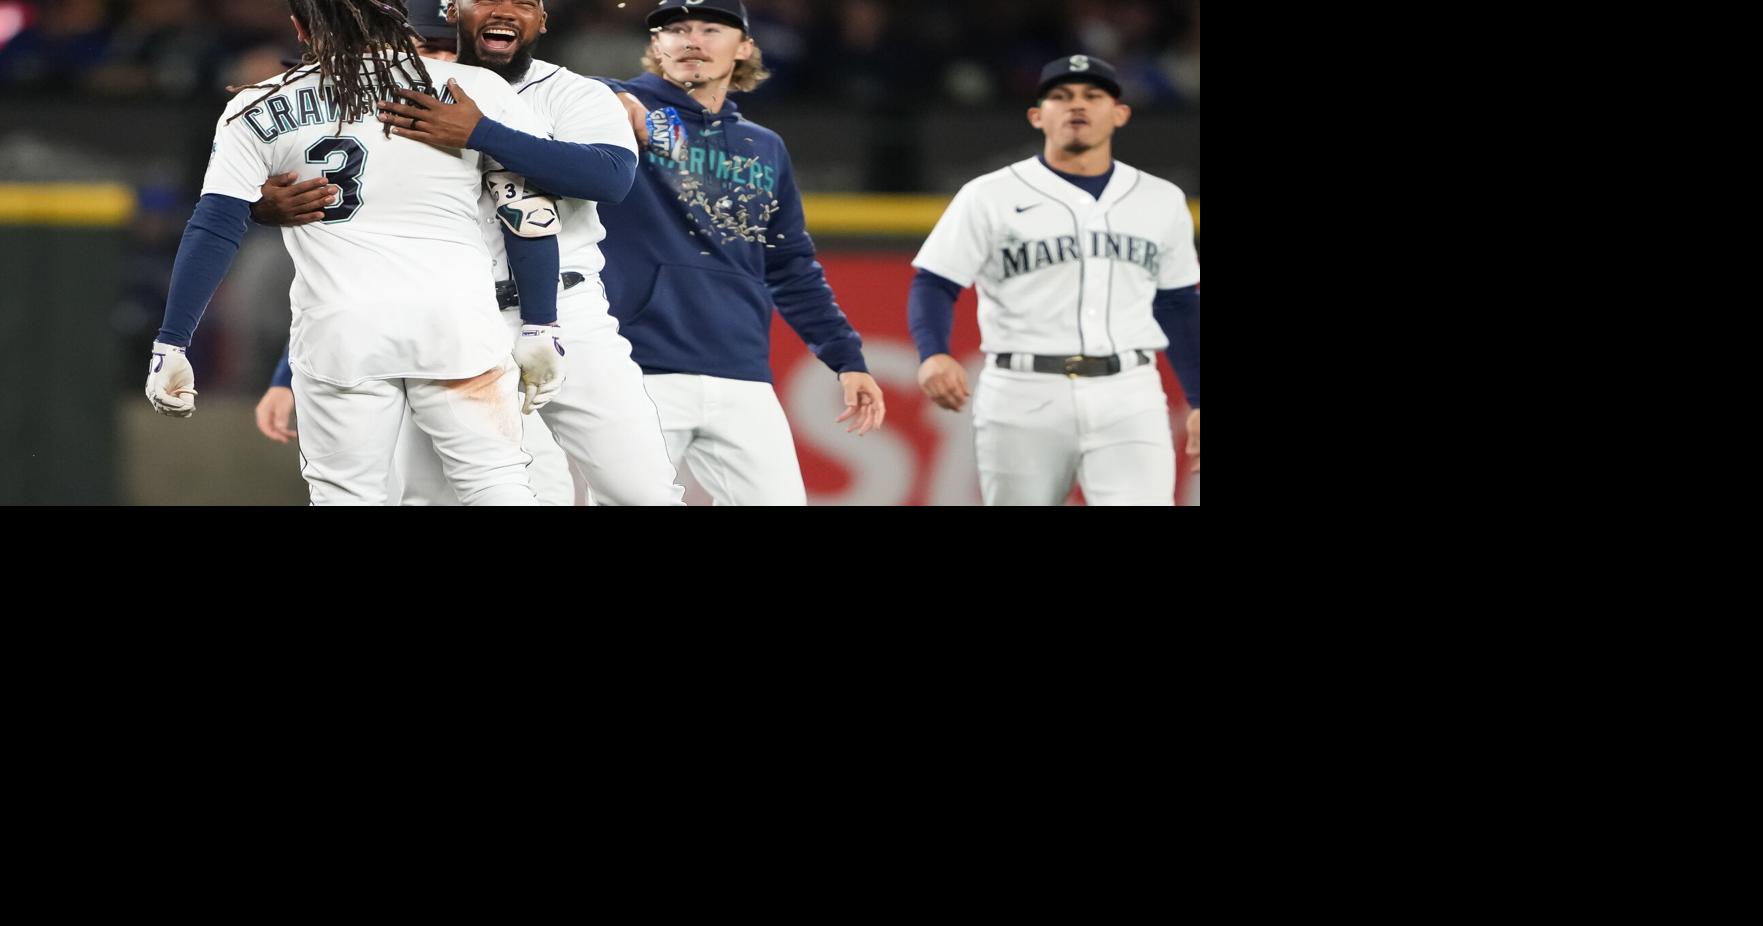 Seattle Mariners' Teoscar Hernandez holds a trident in the dugout